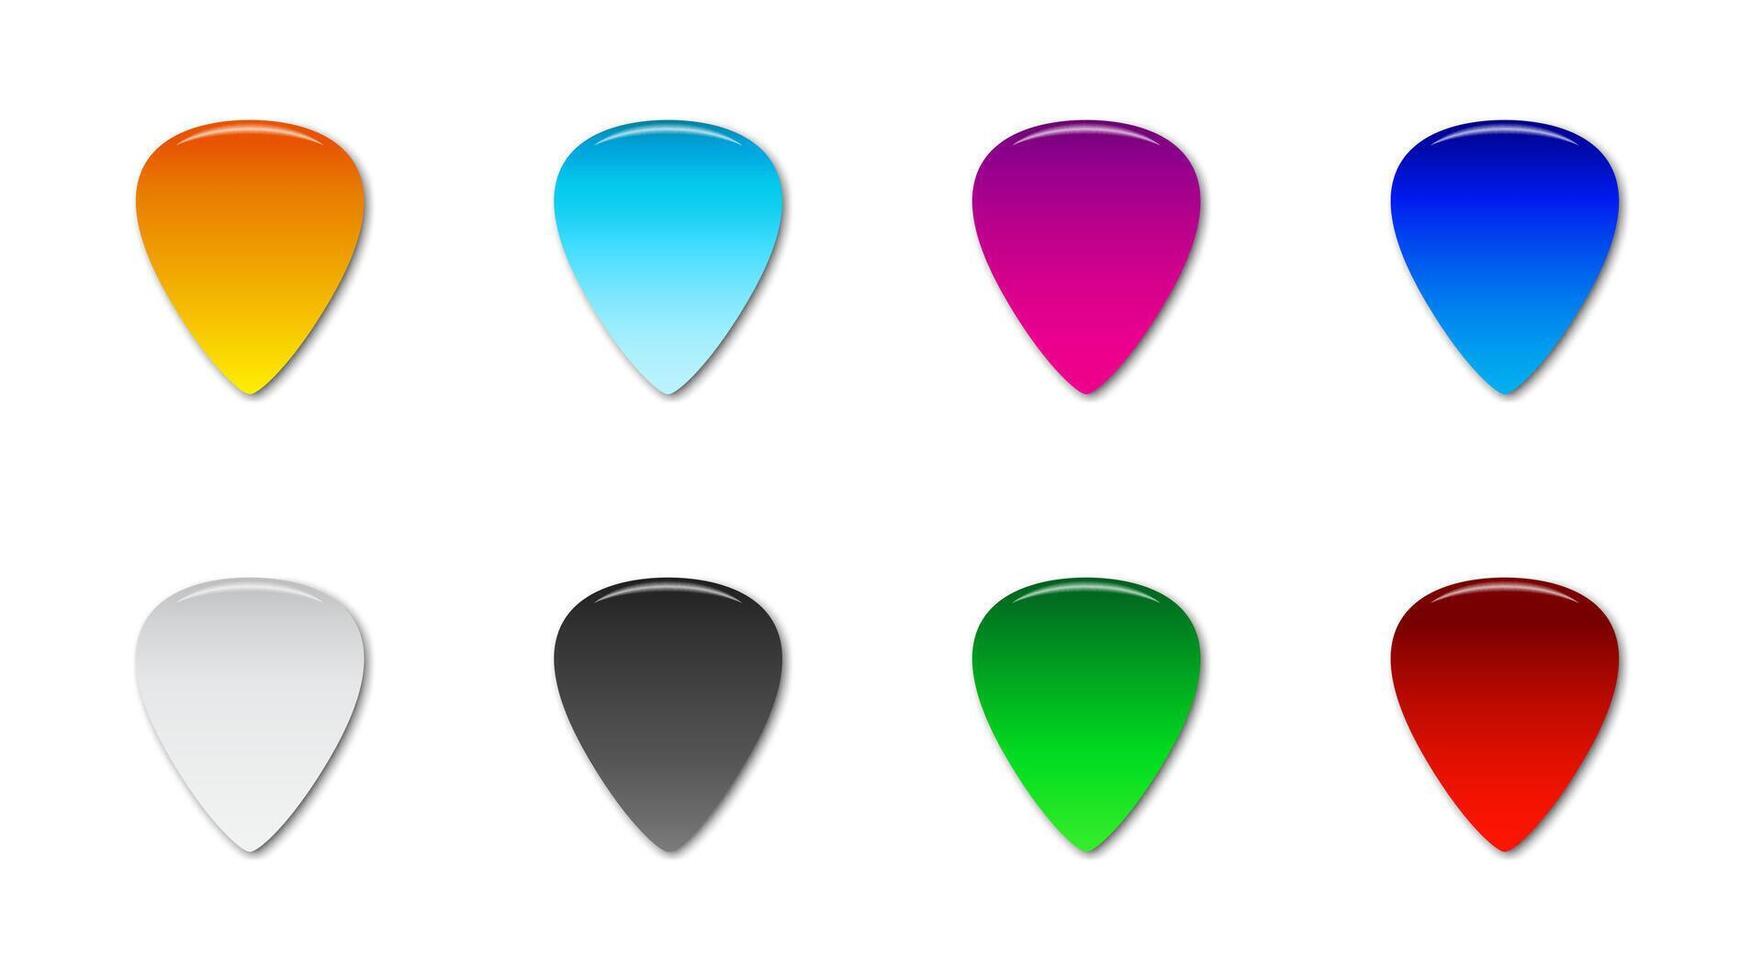 Colorful guitar picks icon set with shadows. Vector illustration.